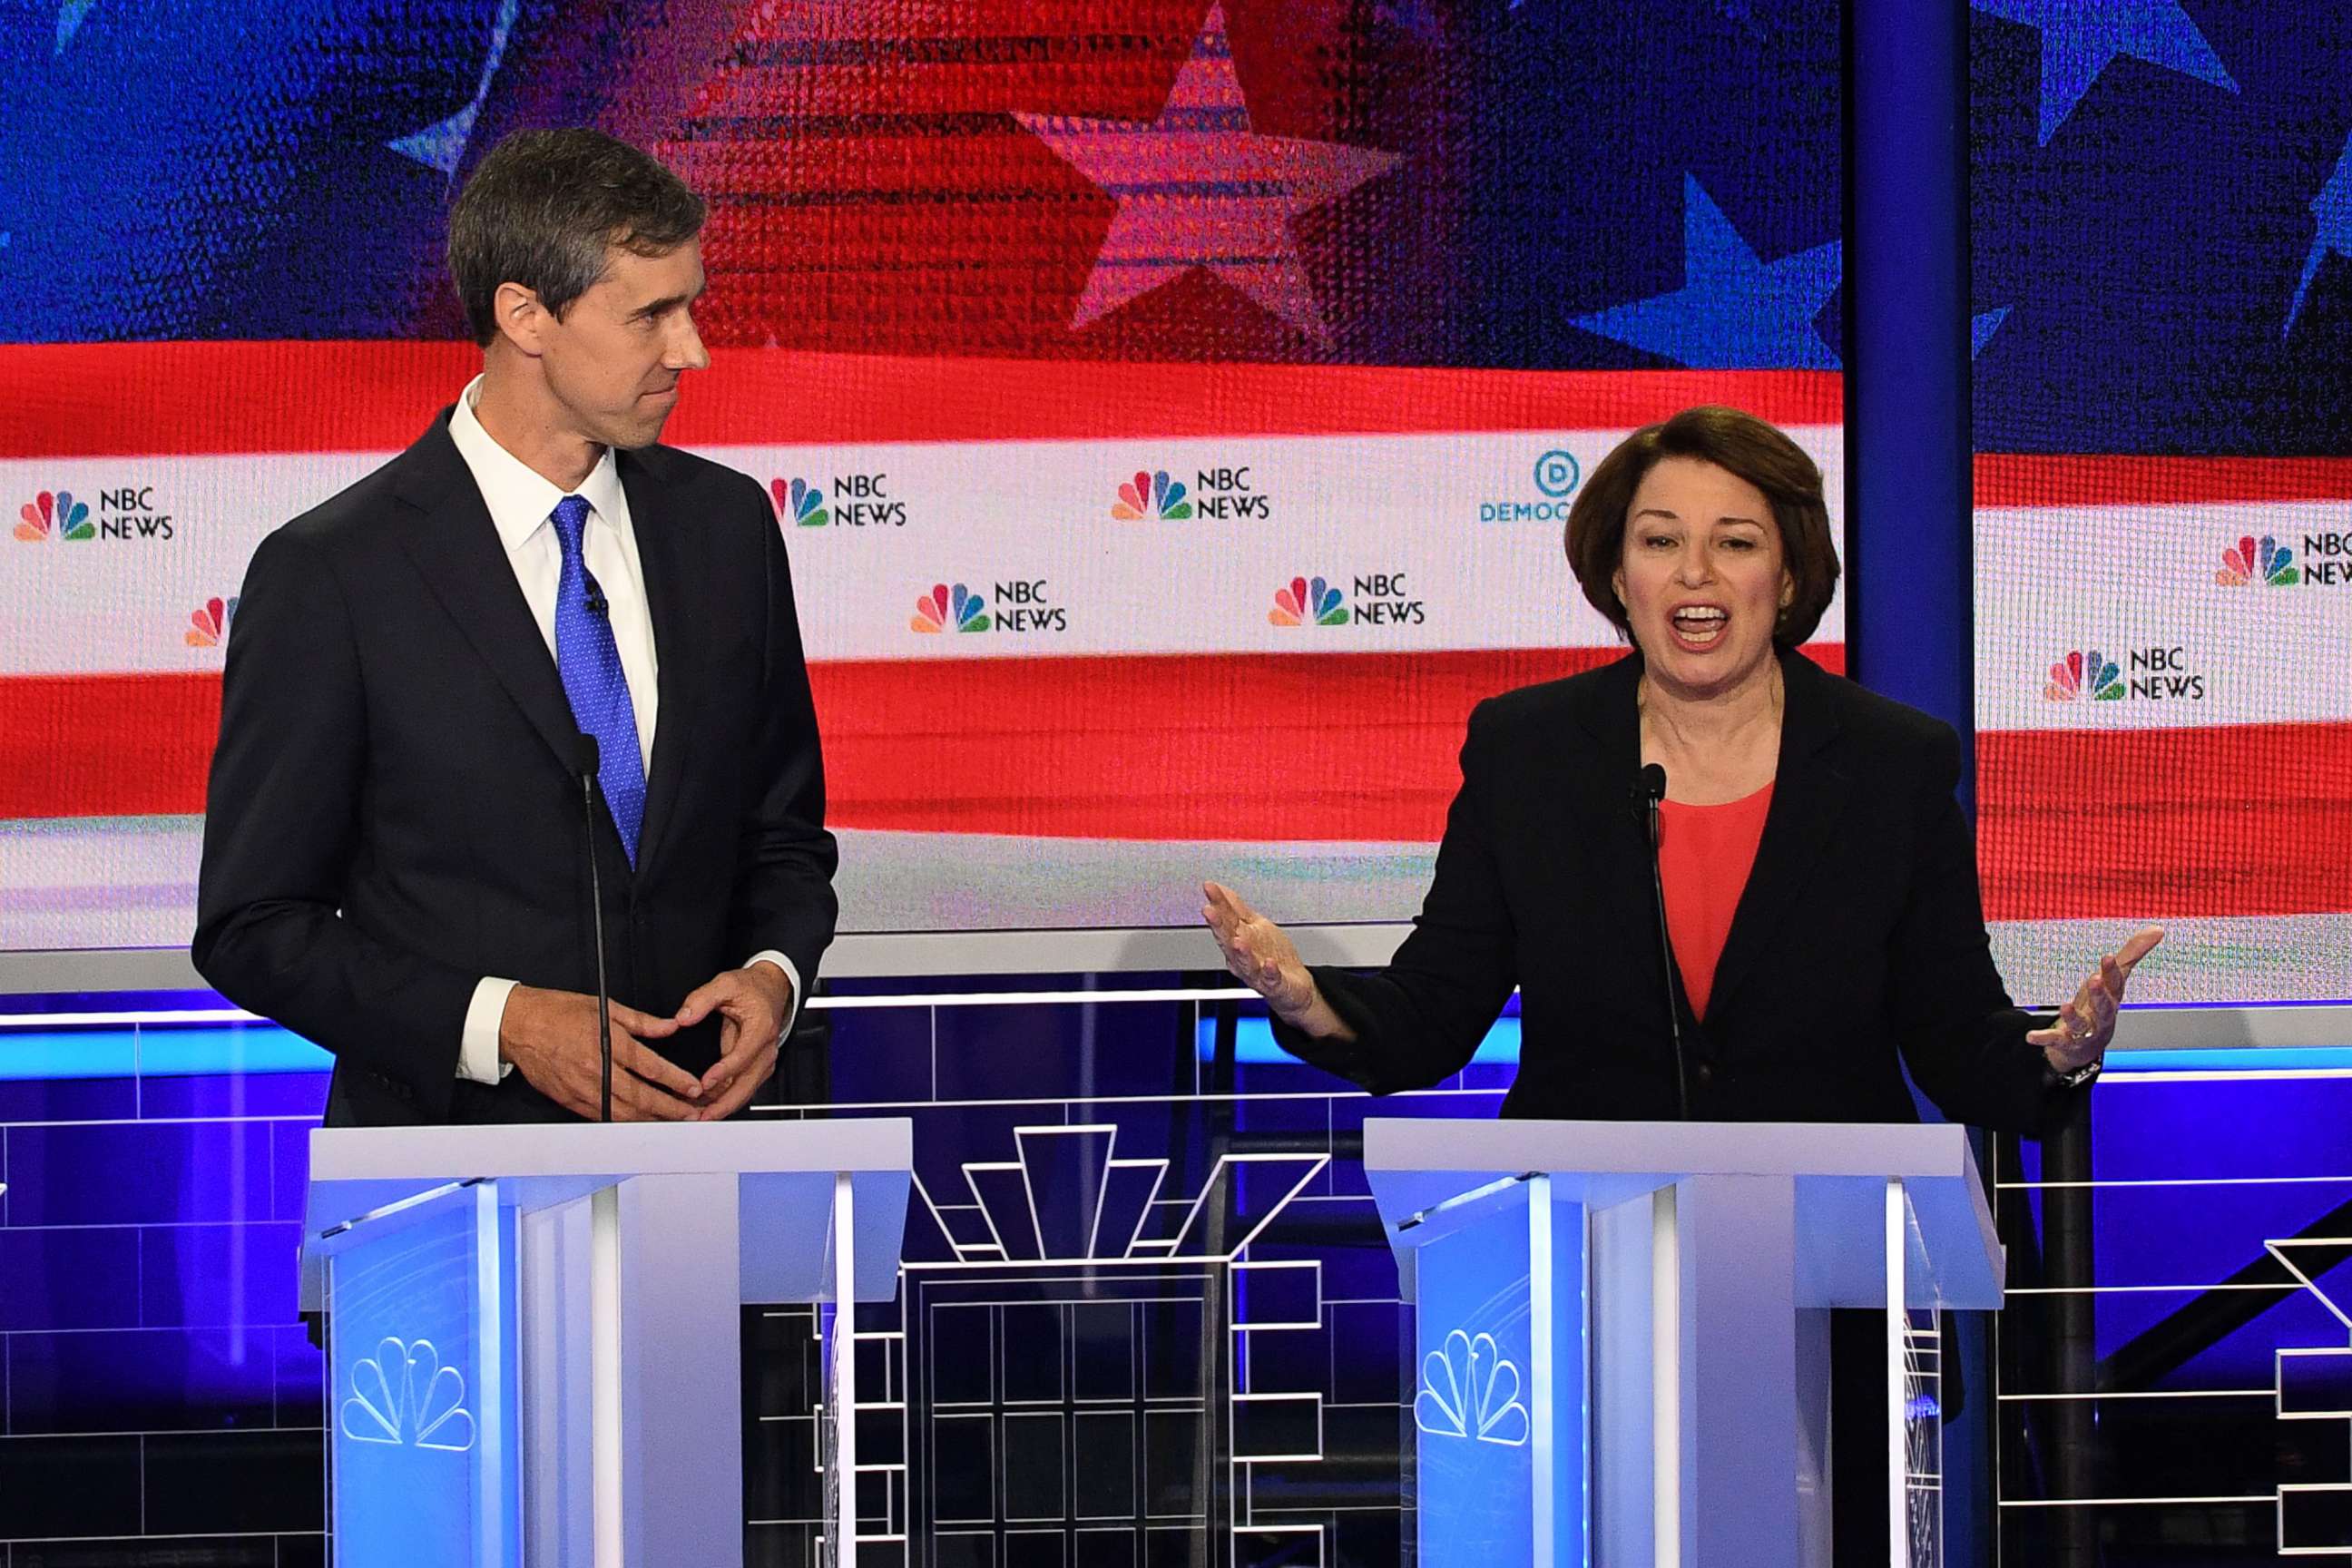 PHOTO: Beto O'Rourke and Amy Klobuchar participate in the first Democratic primary debate hosted by NBC News at the Adrienne Arsht Center for the Performing Arts in Miami, Florida, June 26, 2019.